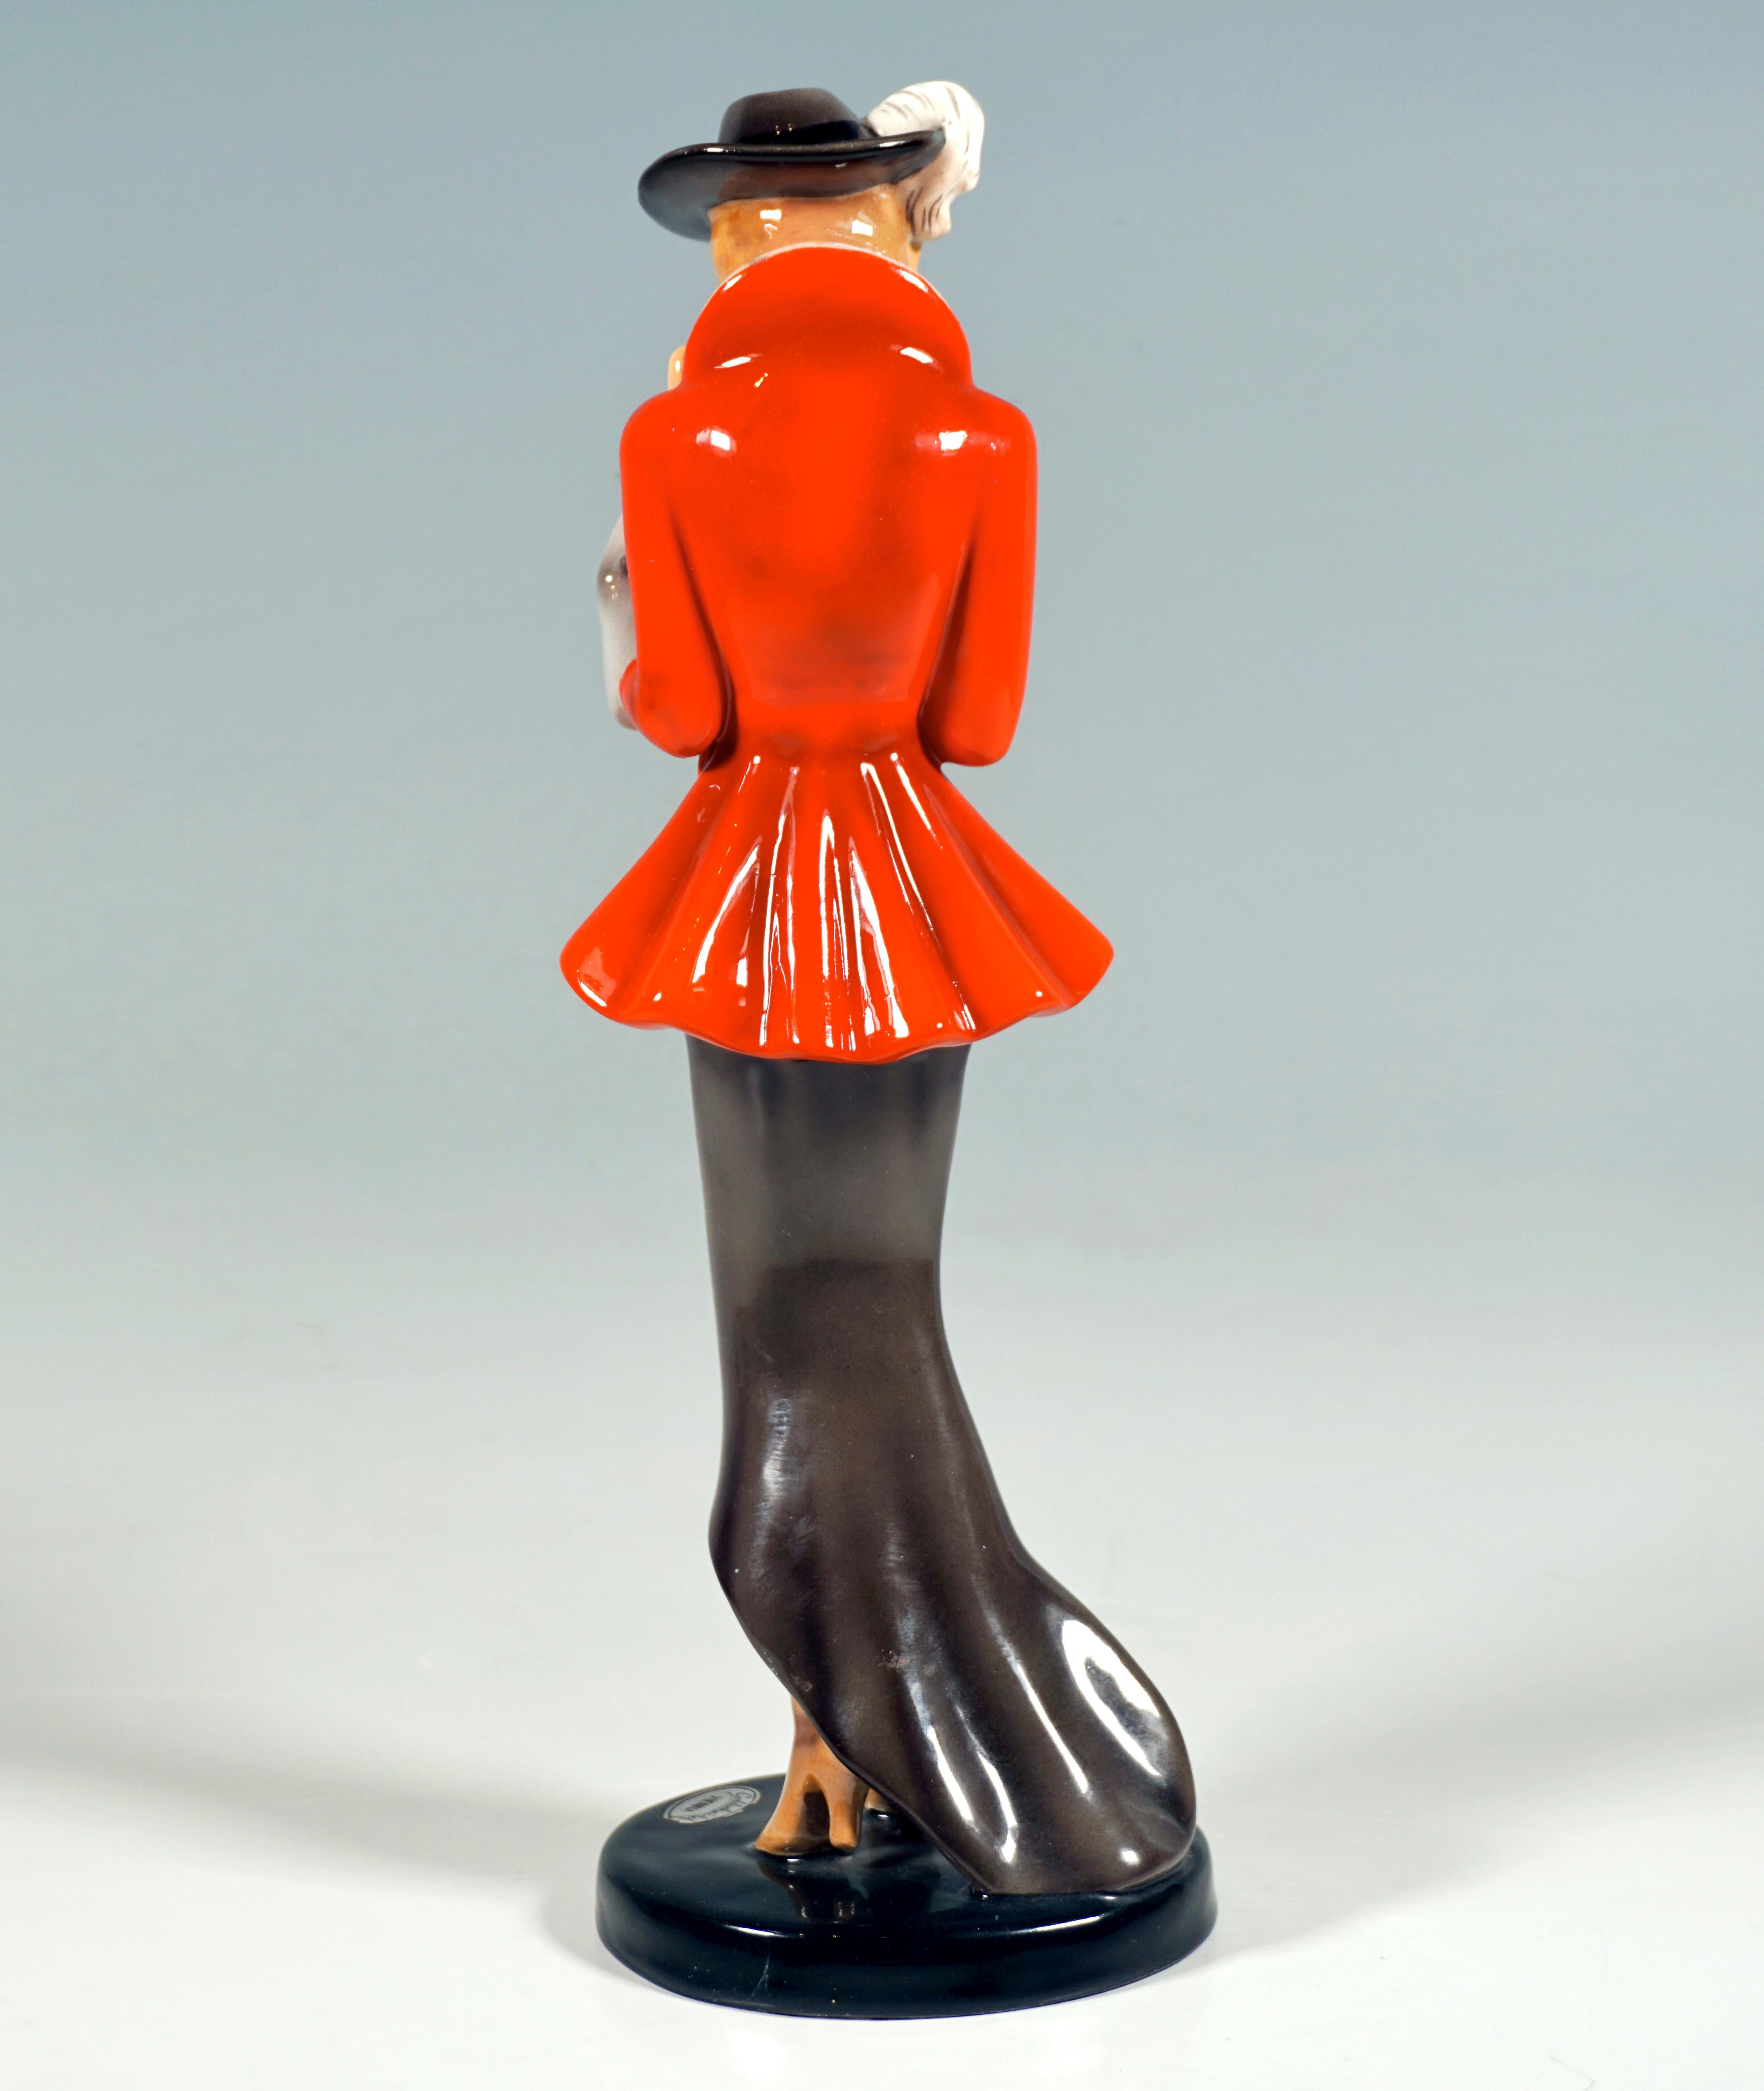 Austrian Goldscheider Art Deco Figurine, Lady in Riding Costume, by Claire Weiss, ca 1937 For Sale